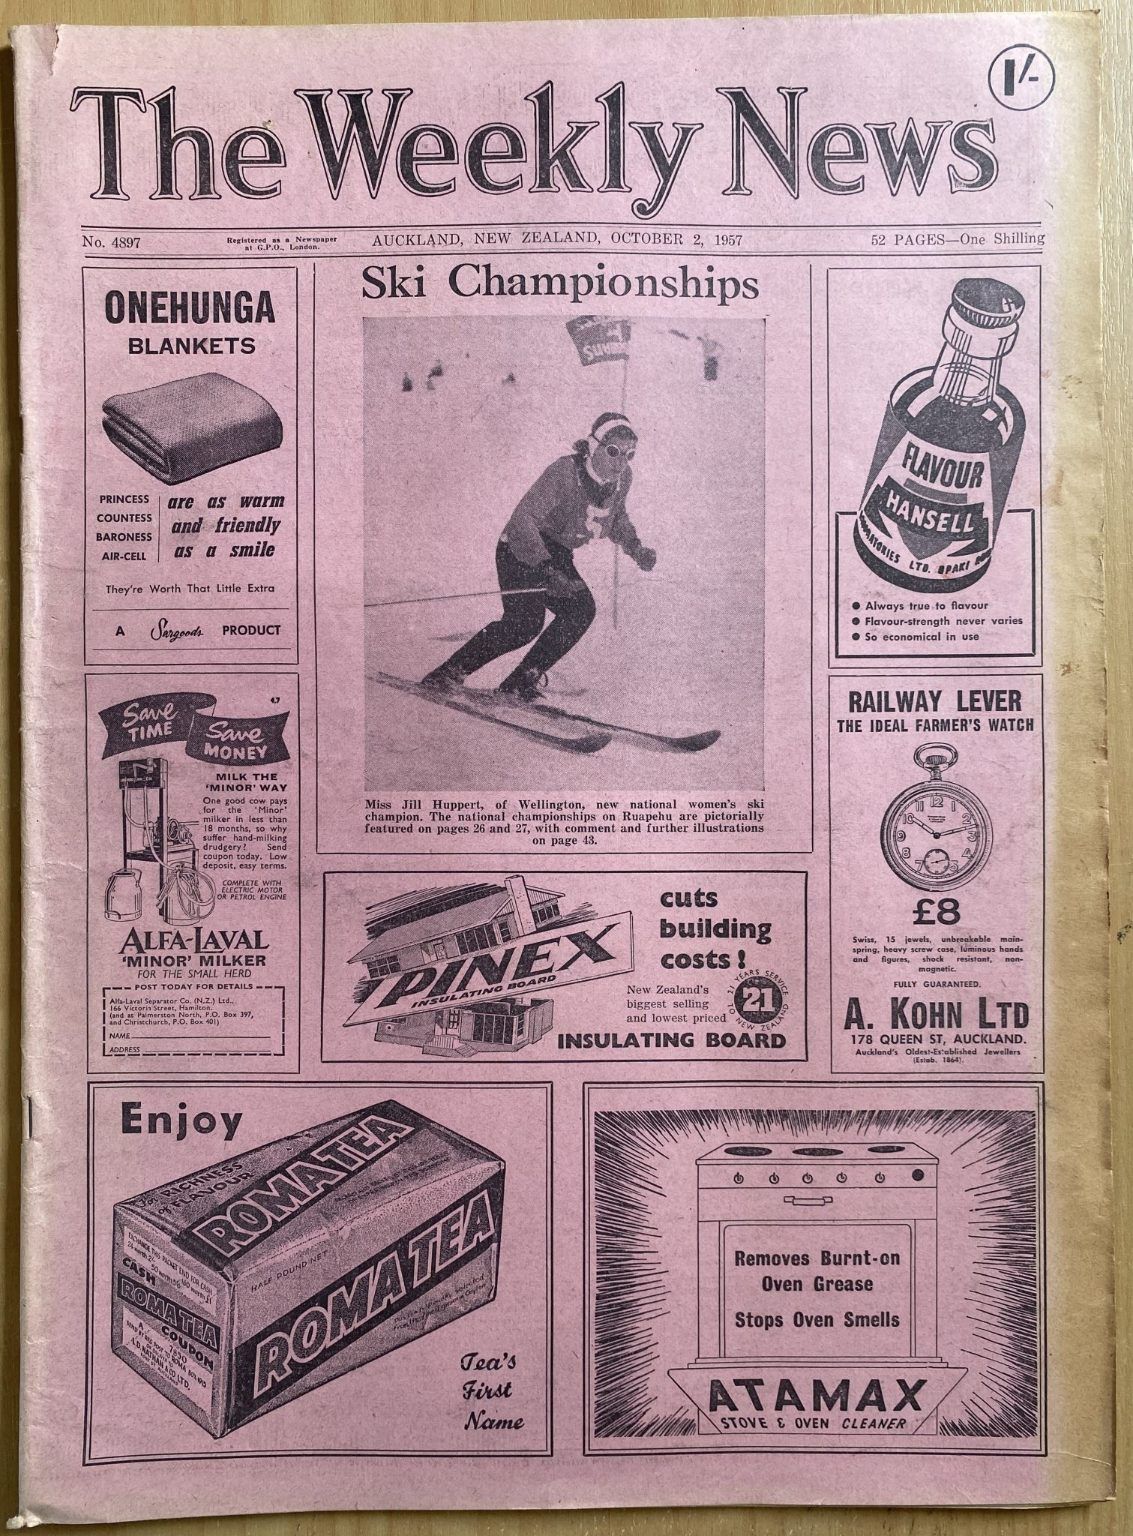 OLD NEWSPAPER: The Weekly News, No. 4897, 2 October 1957